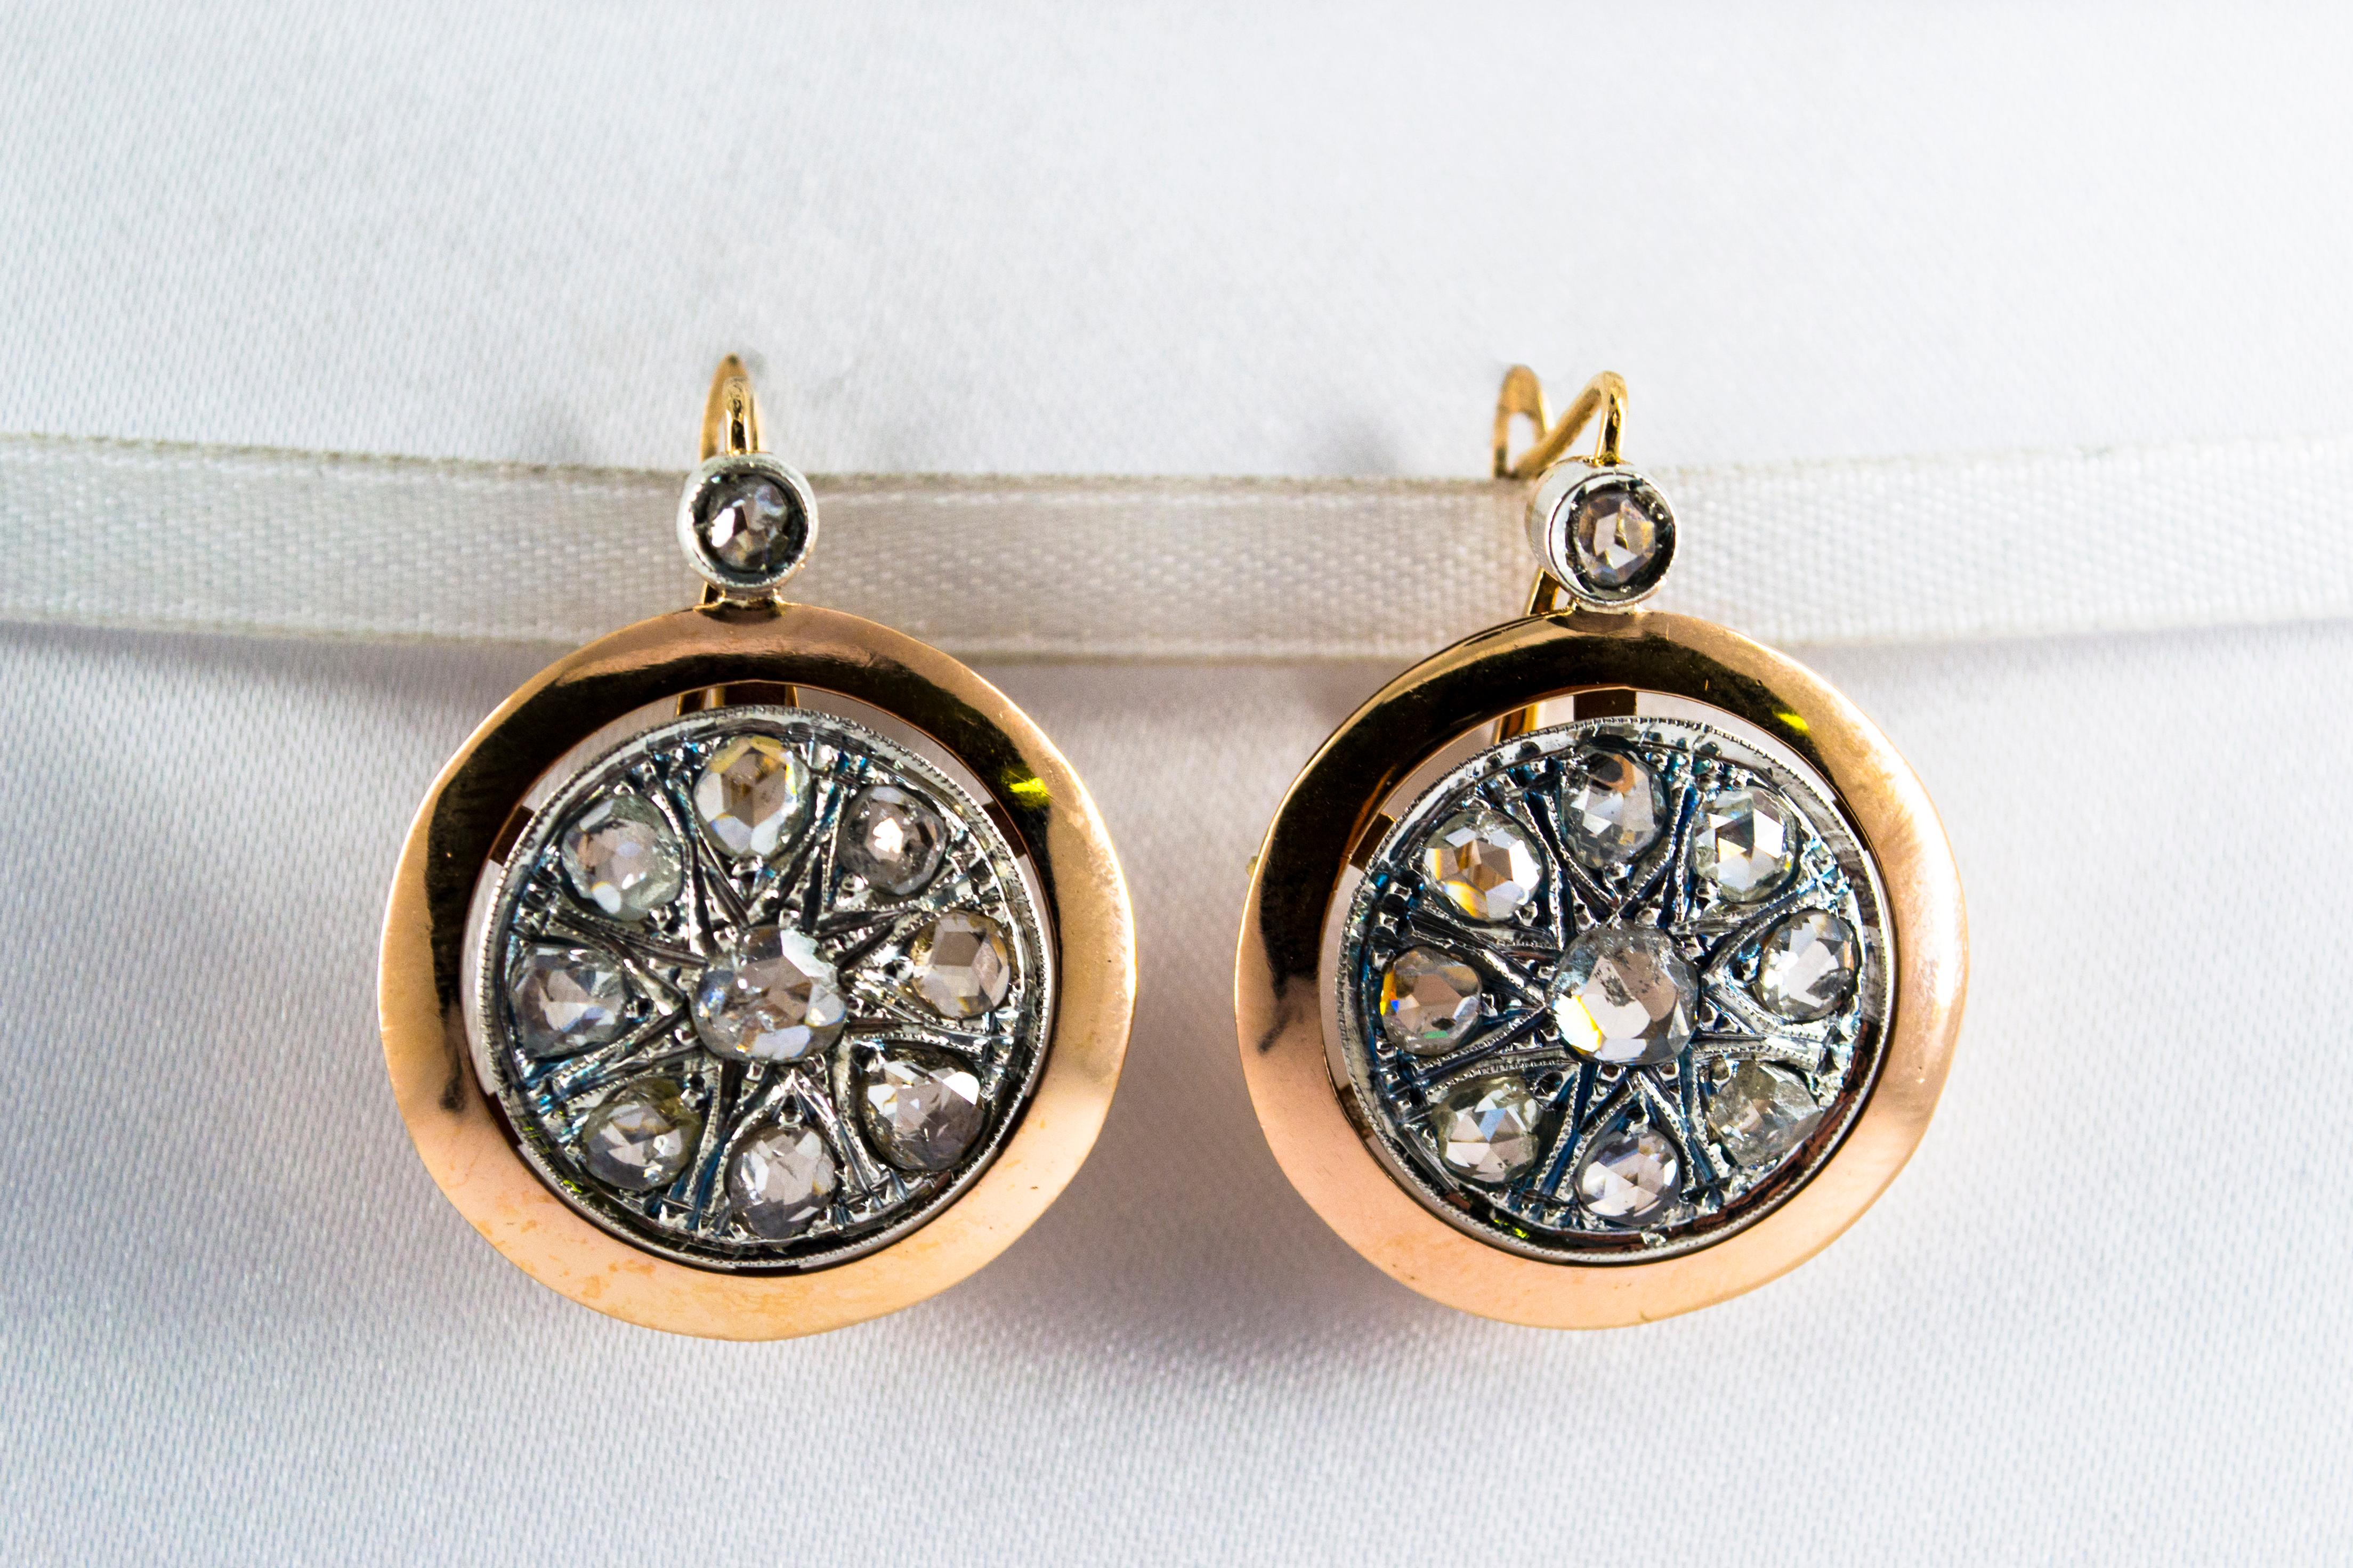 These Earrings are made of 14K Yellow Gold and Sterling Silver.
These Earrings have 3.50 Carats of White Diamonds (Old European Cut).
These Earrings are inspired by Renaissance Style.
All our Earrings have pins for pierced ears but we can change the